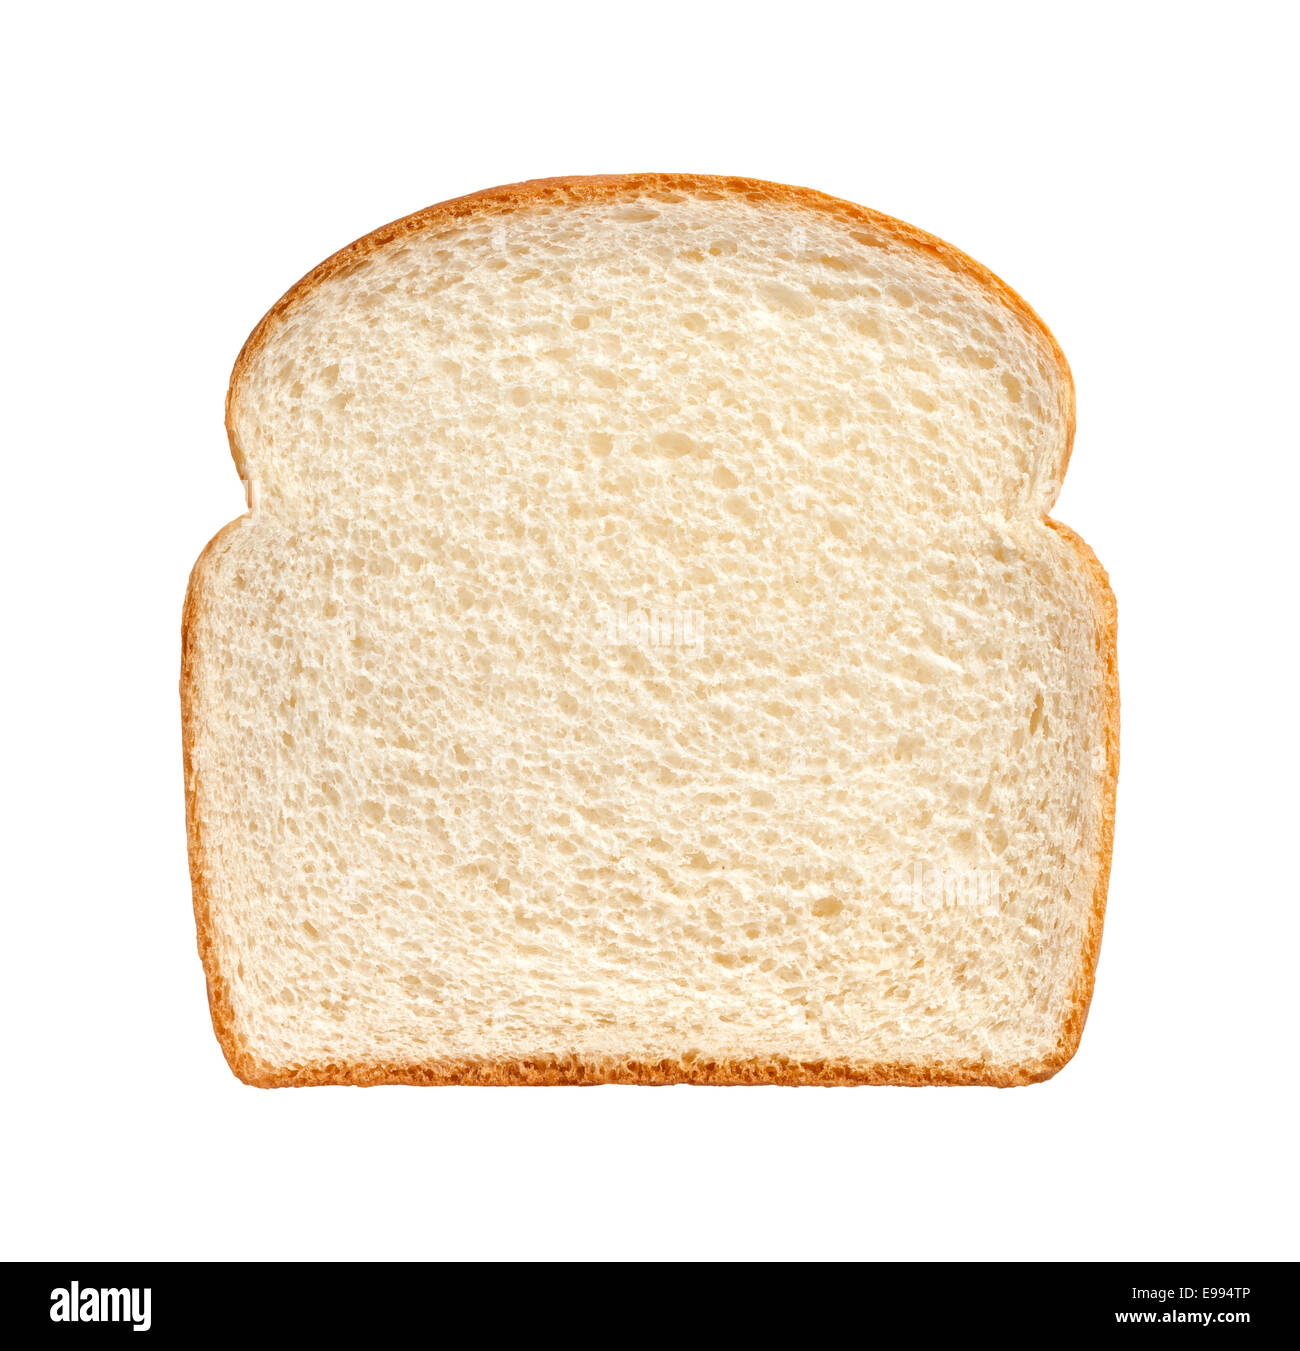 Slice of bread Cut Out Stock Images & Pictures - Alamy